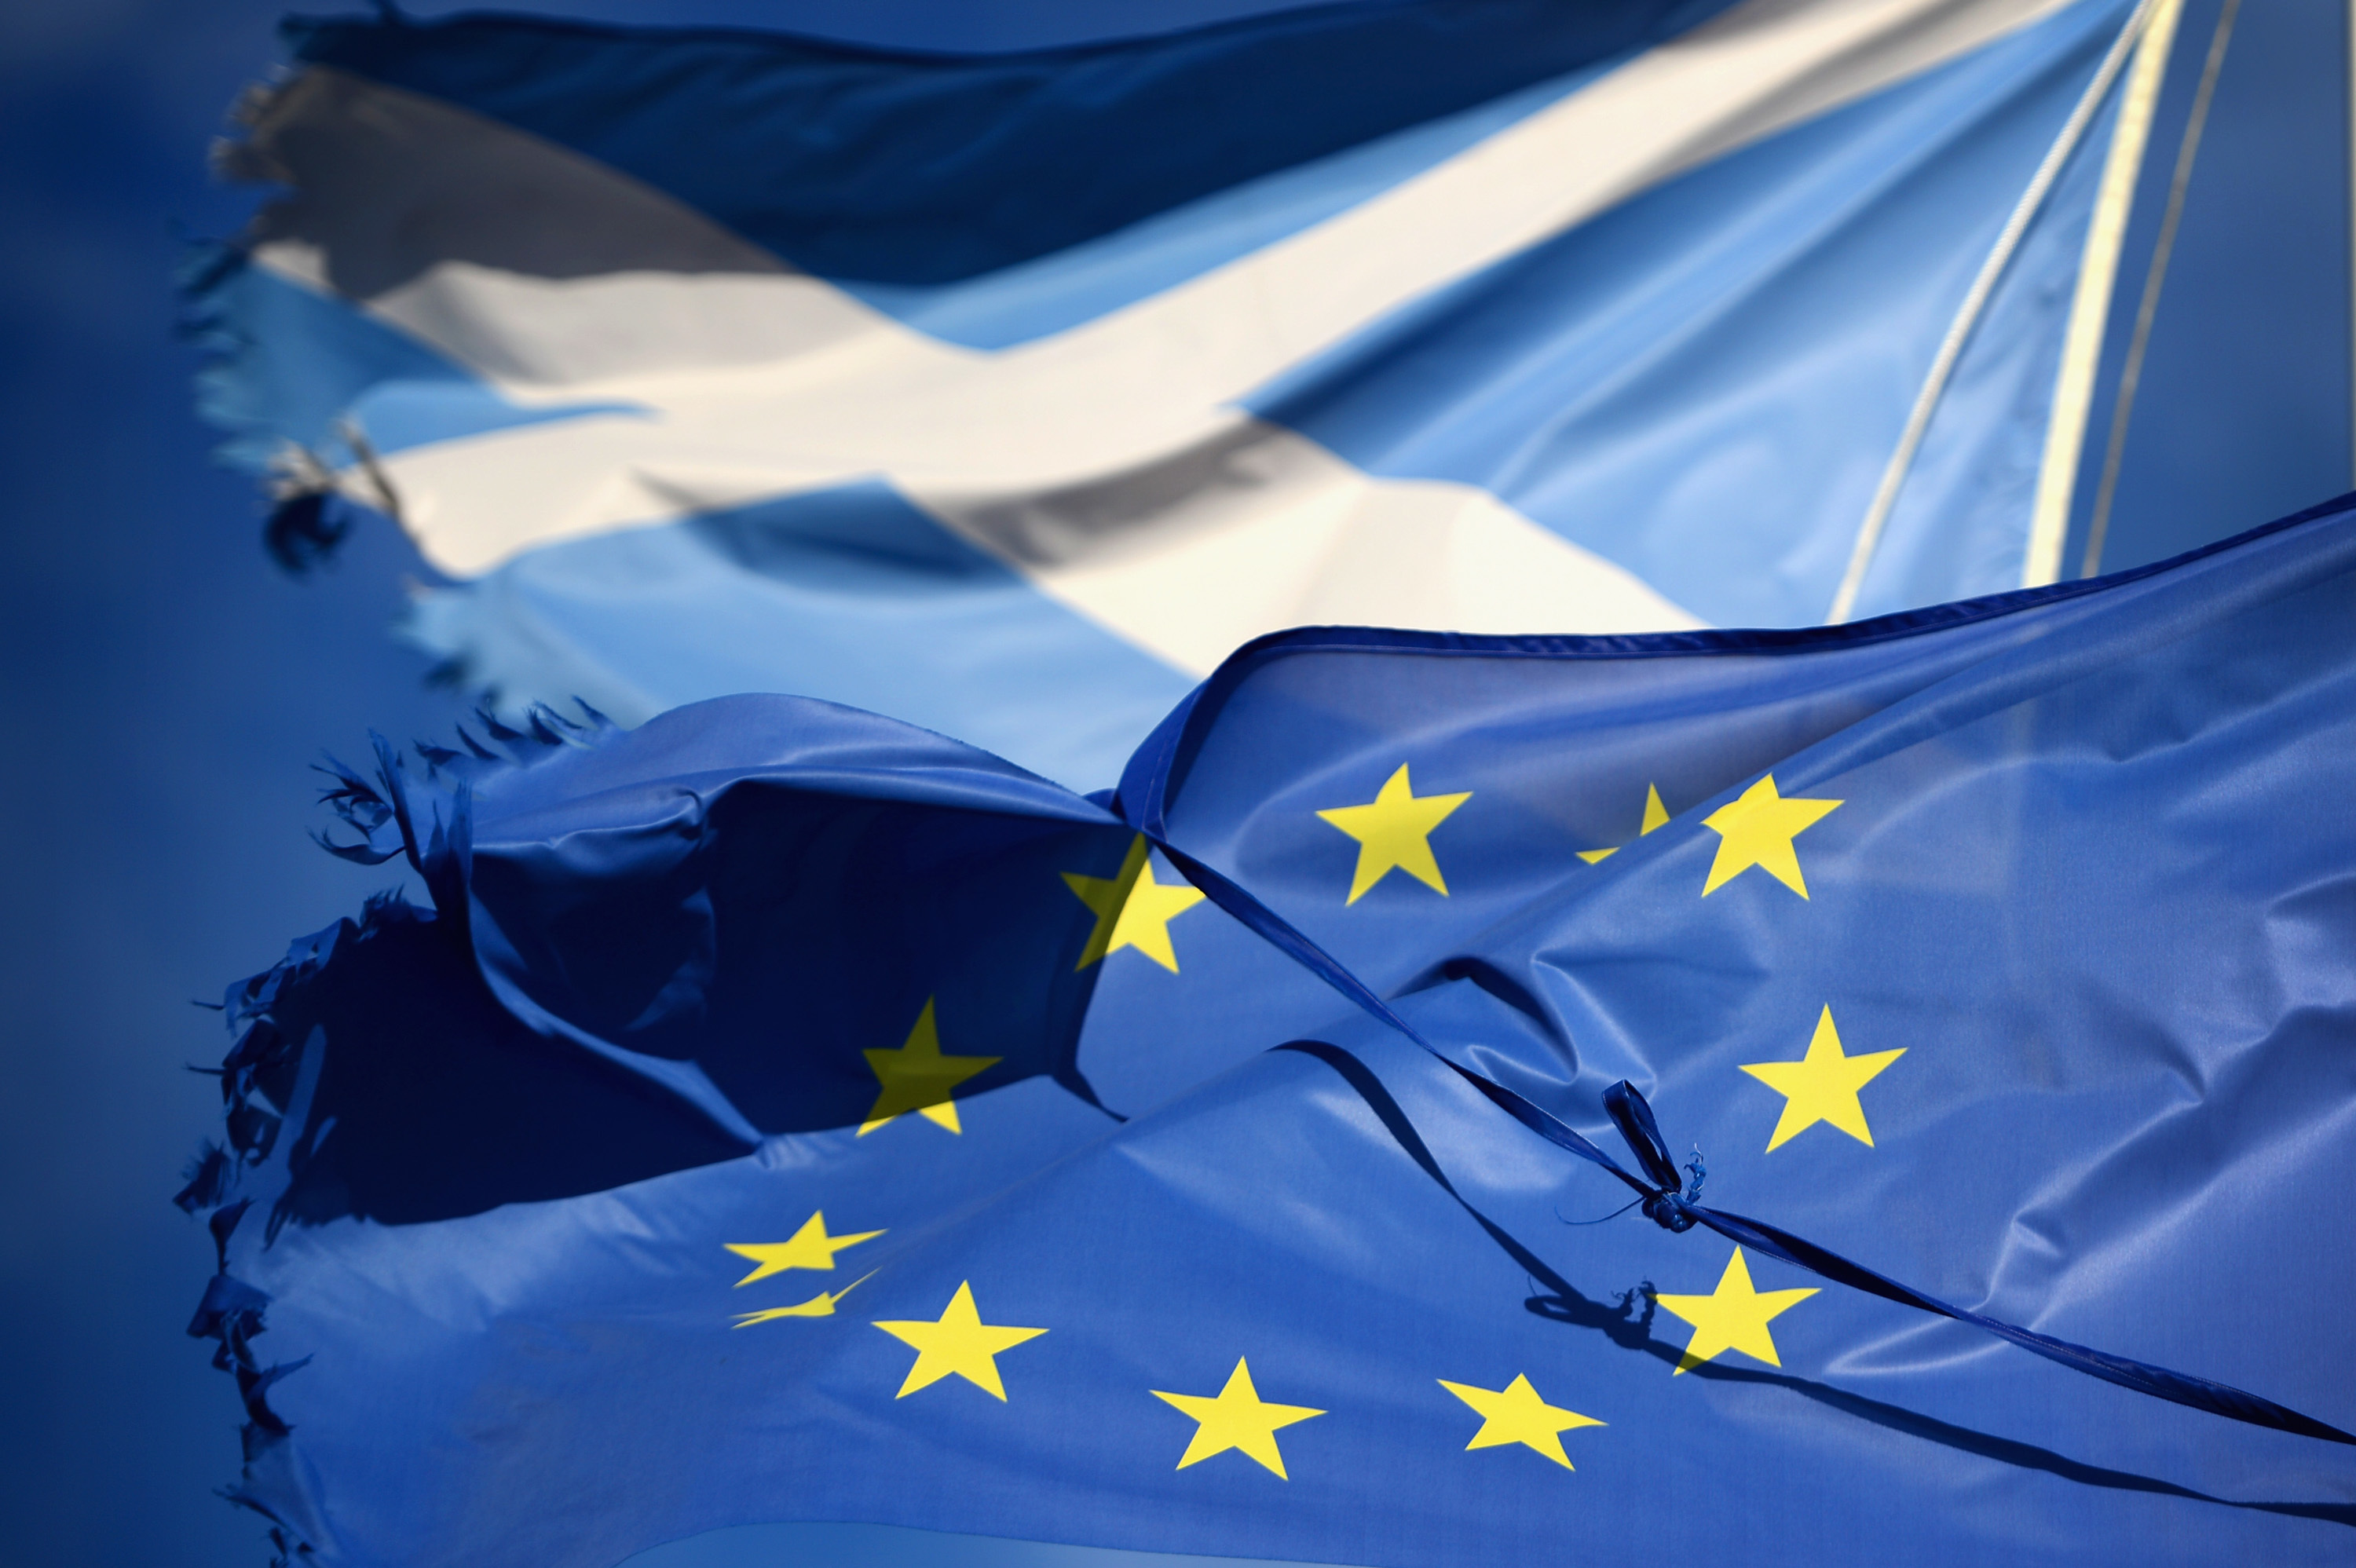 The threat of leaving the EU seems to have made more Scots supportive of independence.